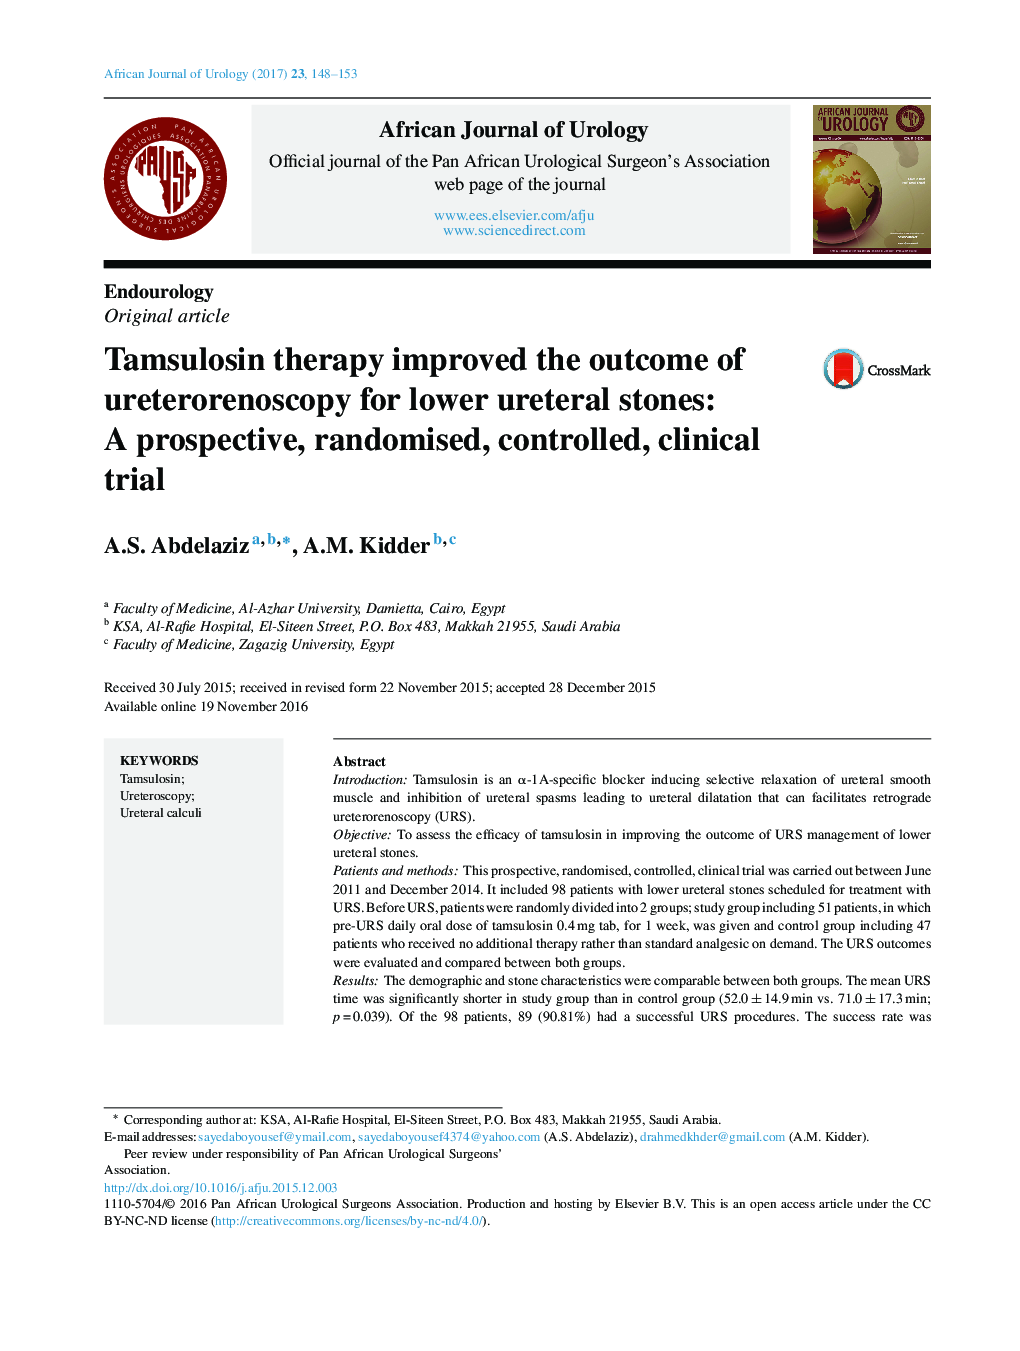 EndourologyOriginal articleTamsulosin therapy improved the outcome of ureterorenoscopy for lower ureteral stones: A prospective, randomised, controlled, clinical trial